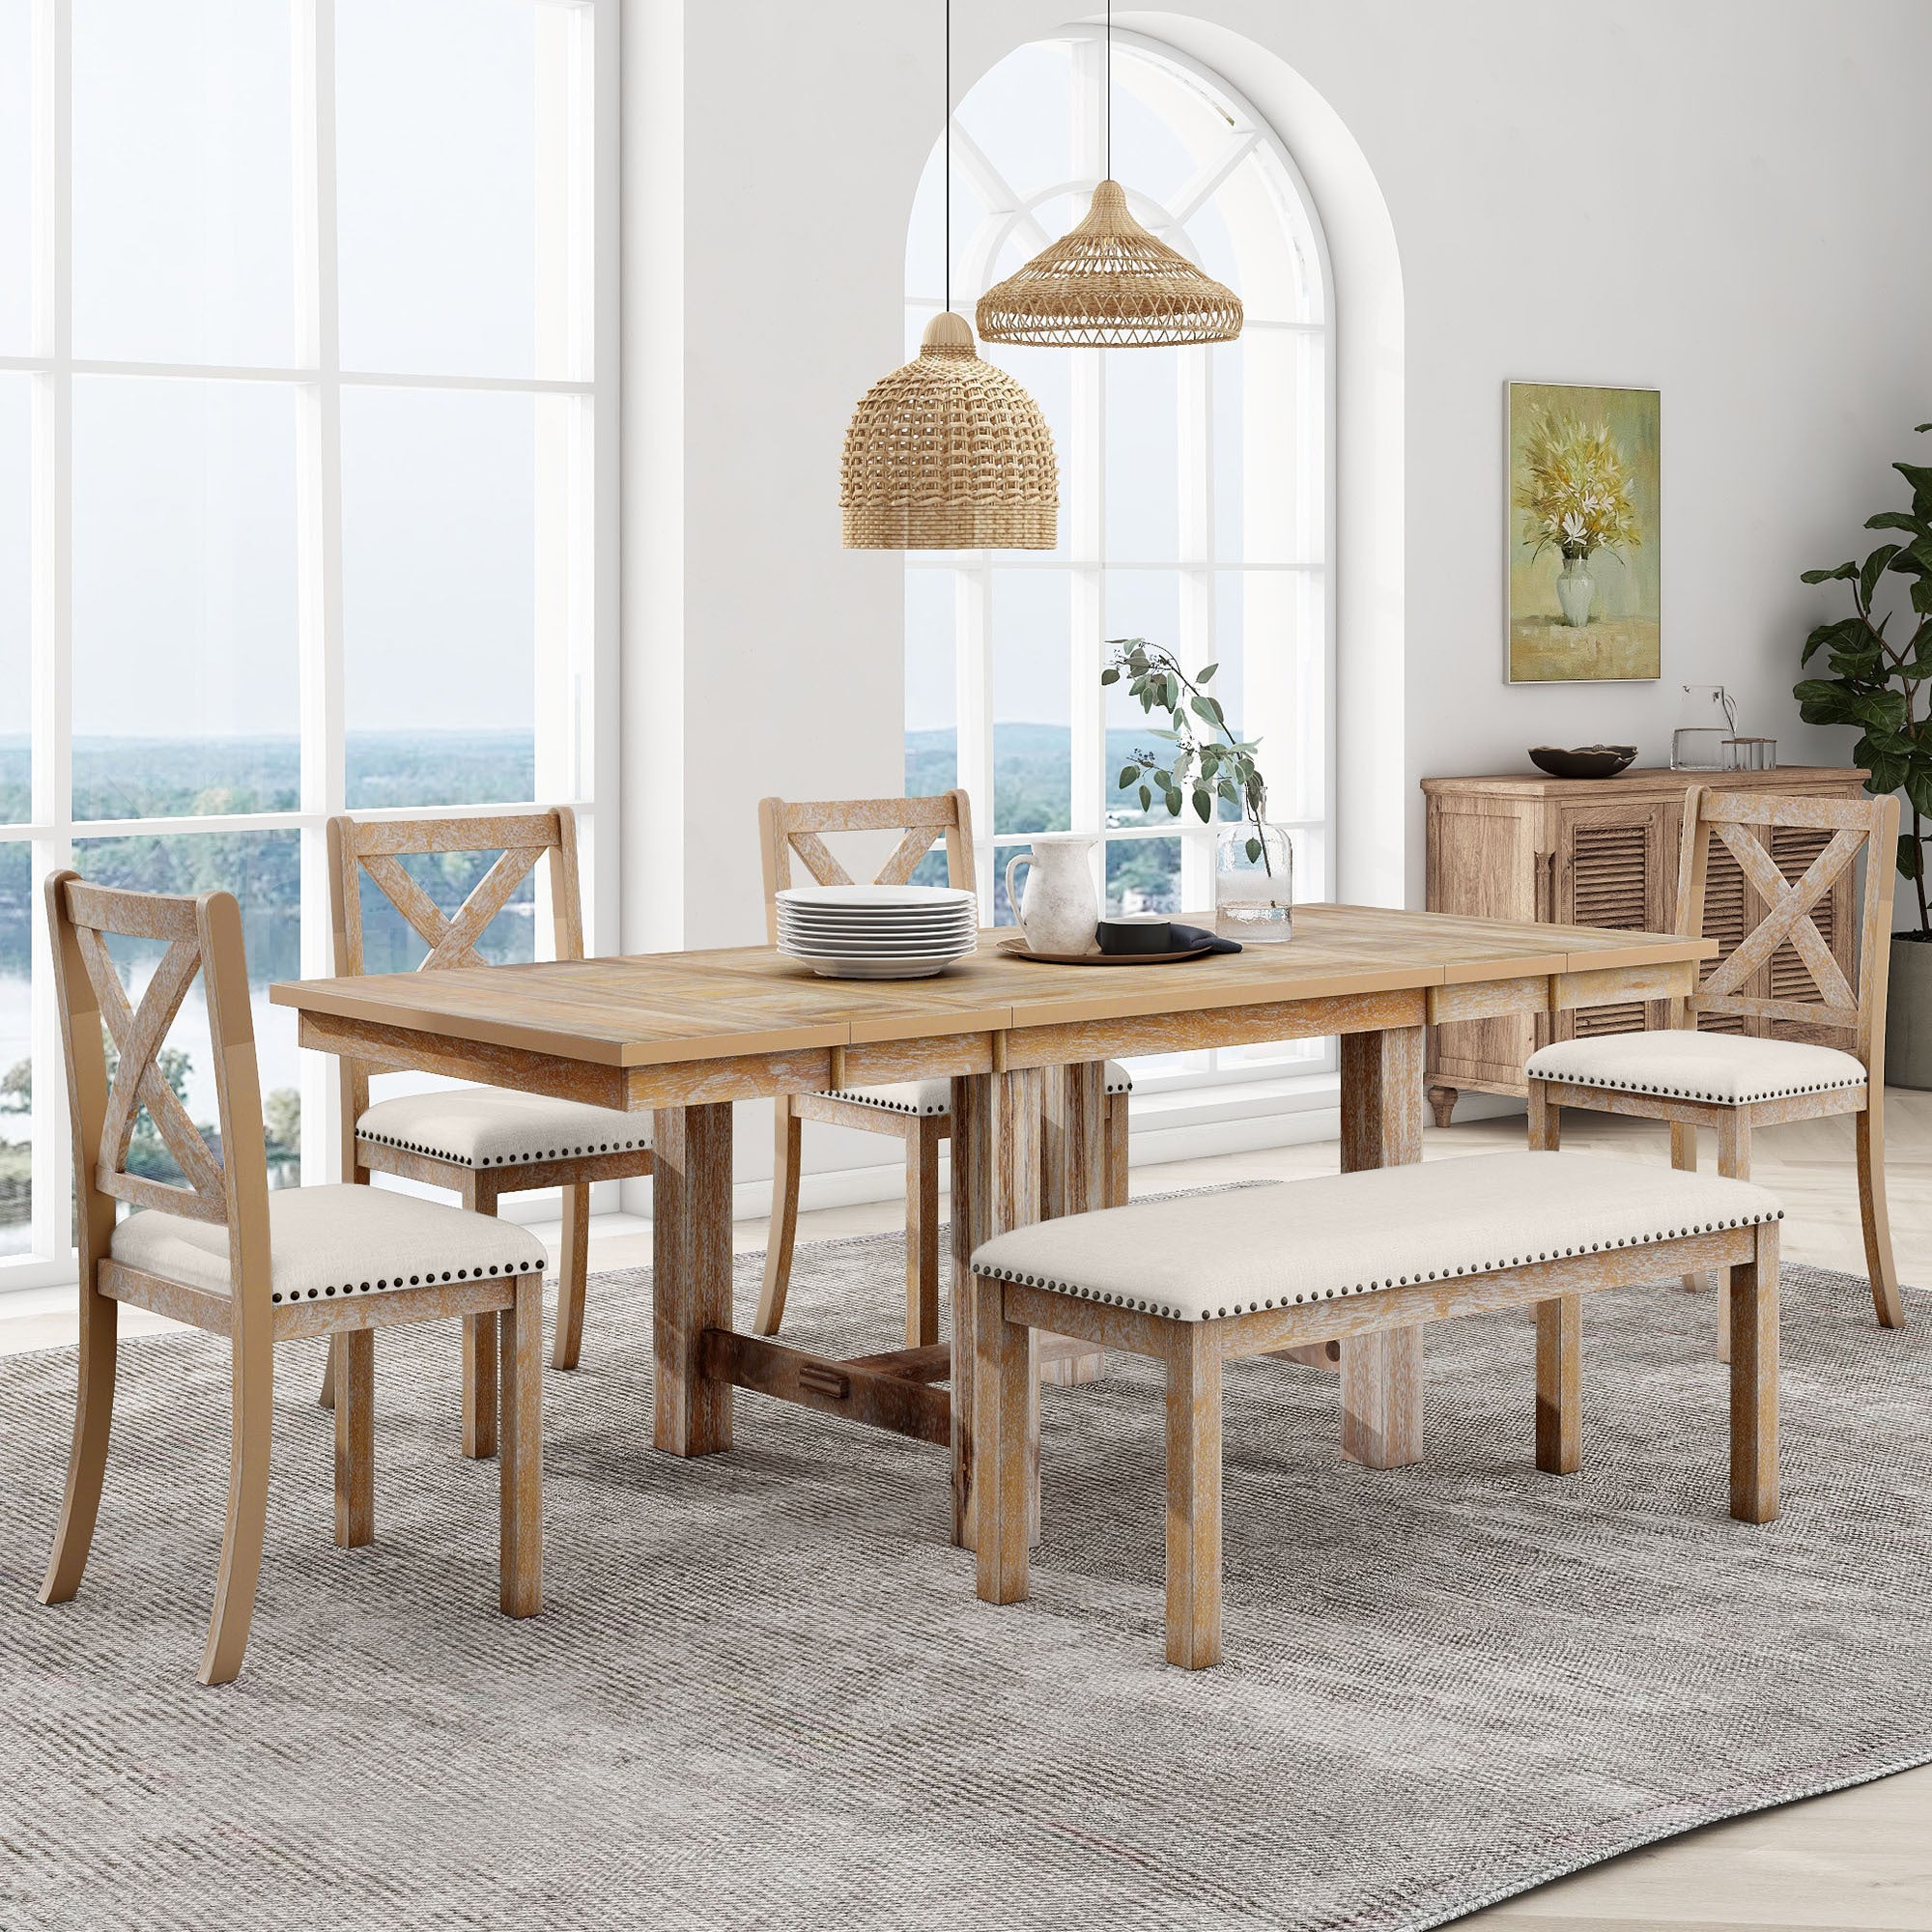 Farmhouse 6-Piece Extendable Dining Table with Footrest, 4 Upholstered Dining Chairs and Dining Bench - Natural+Beige Cushion